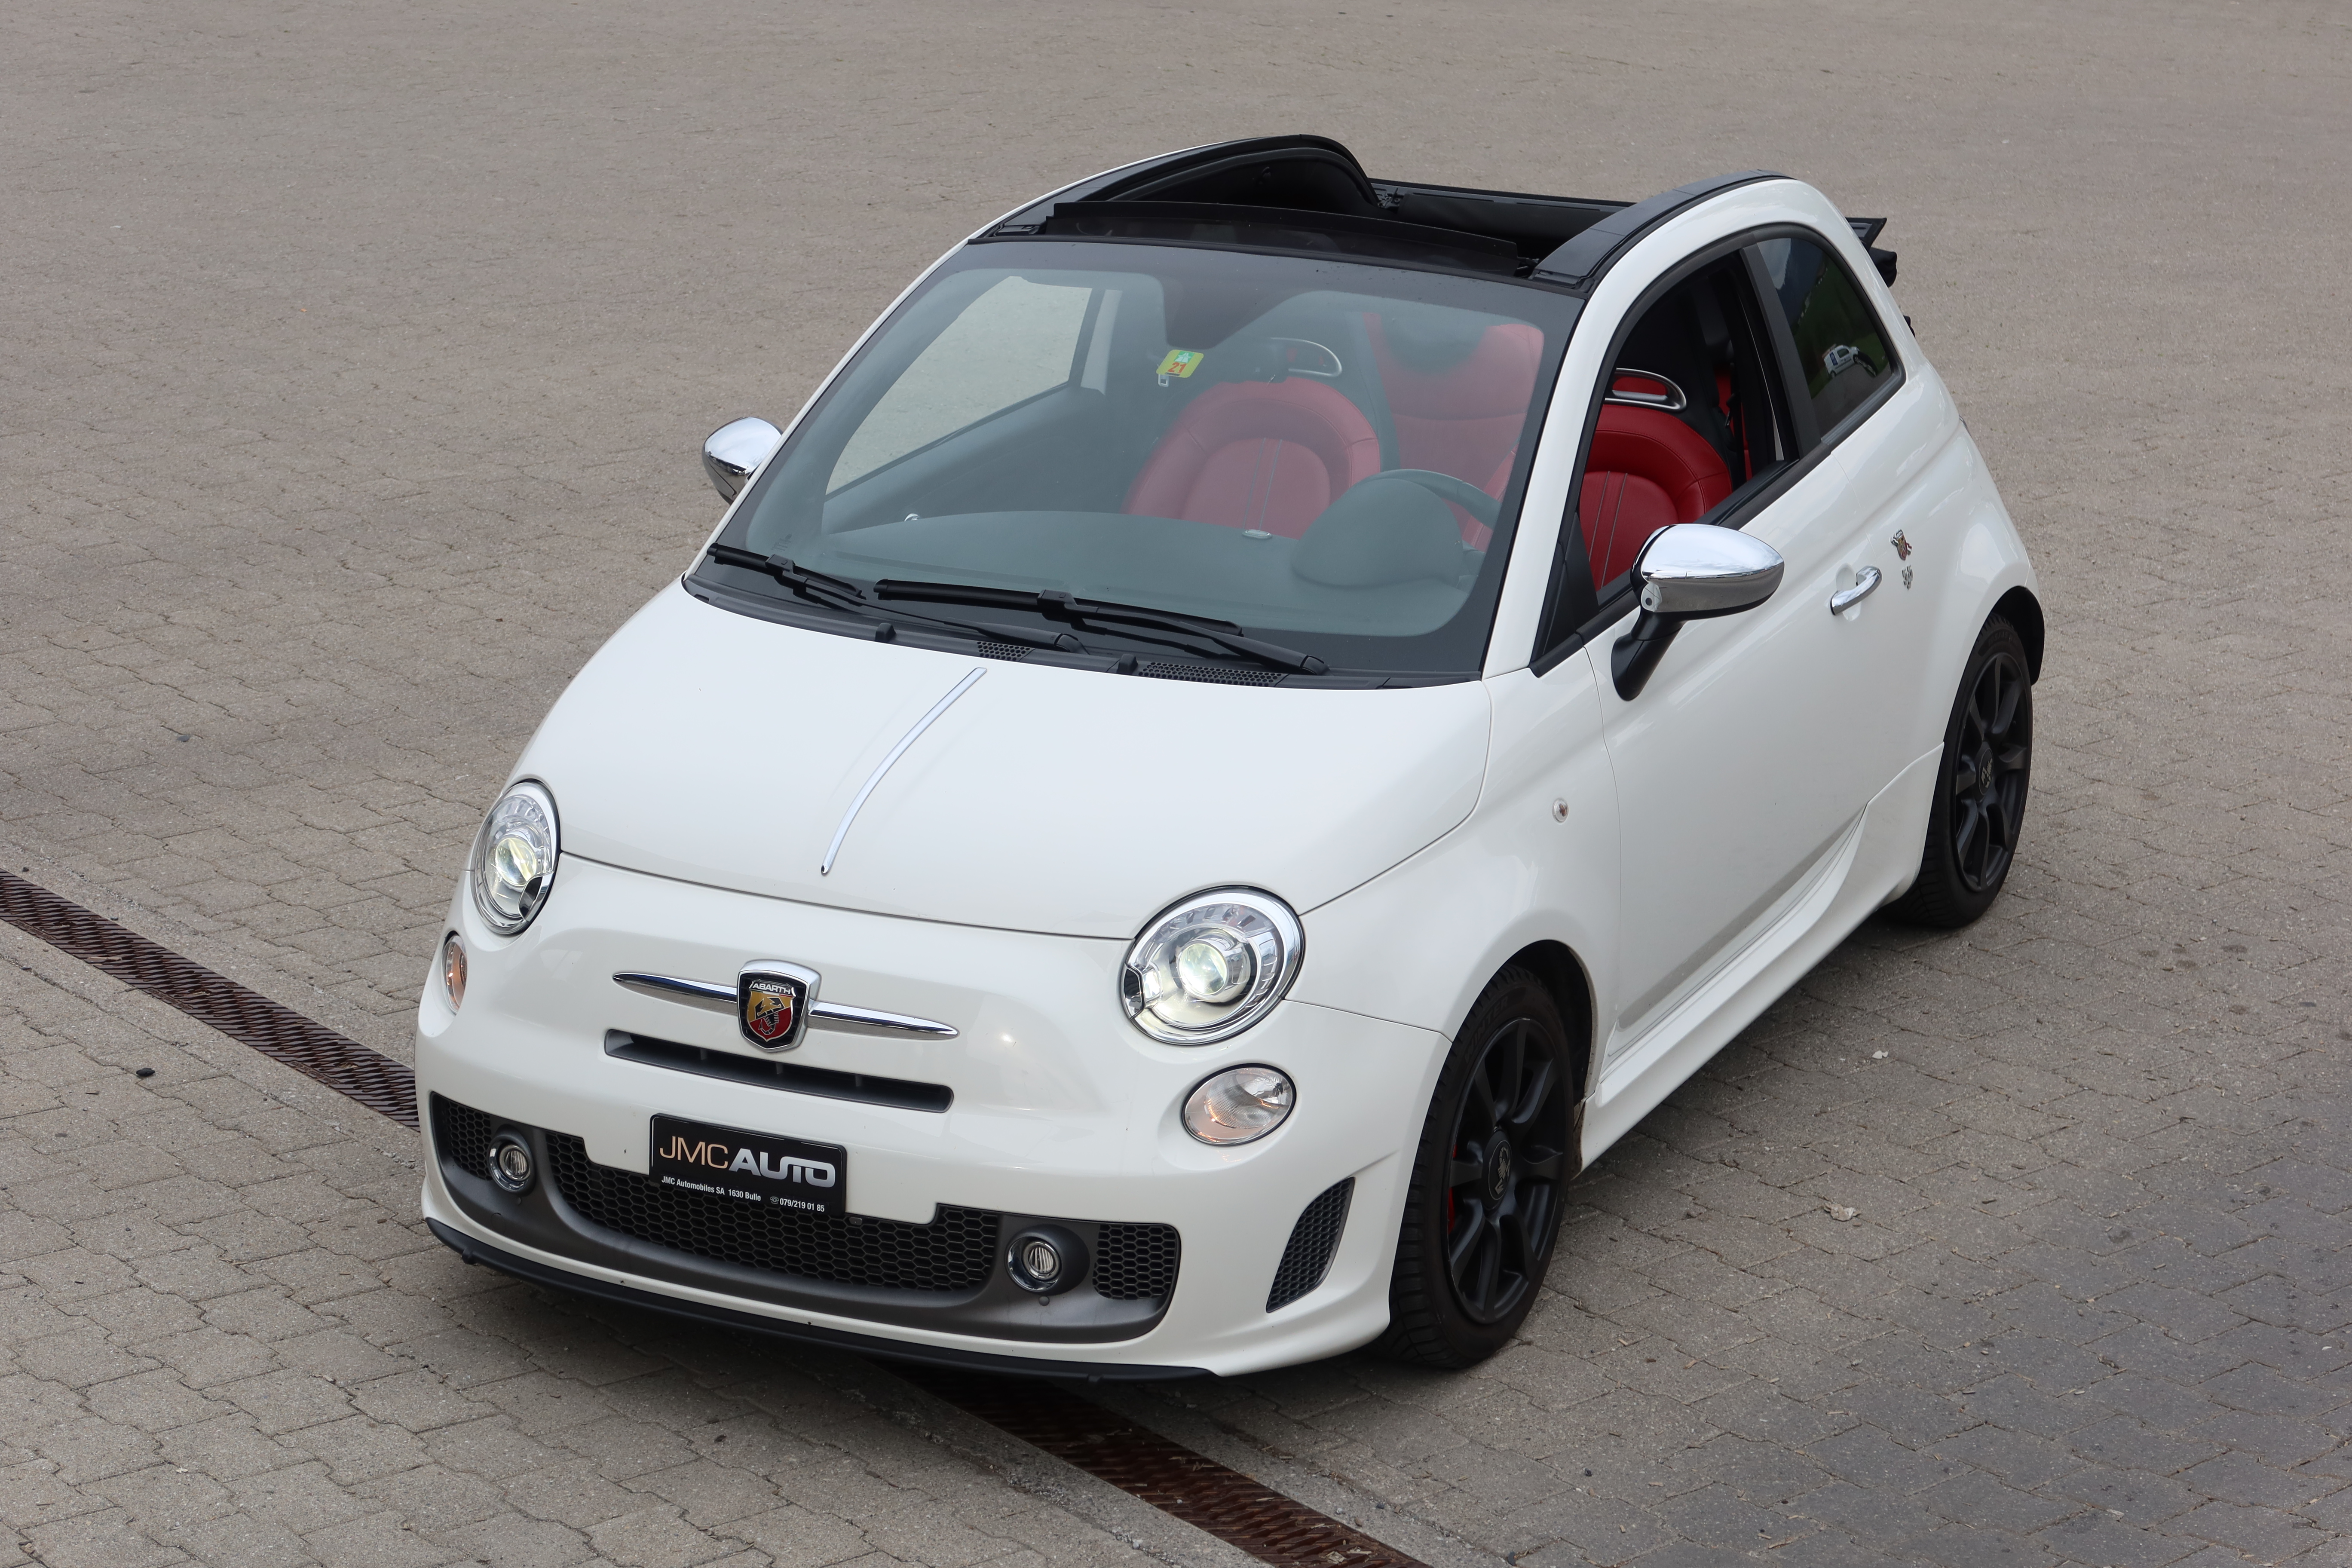 Fiat 500 C Cabriolet / Convertible Chf 80.-